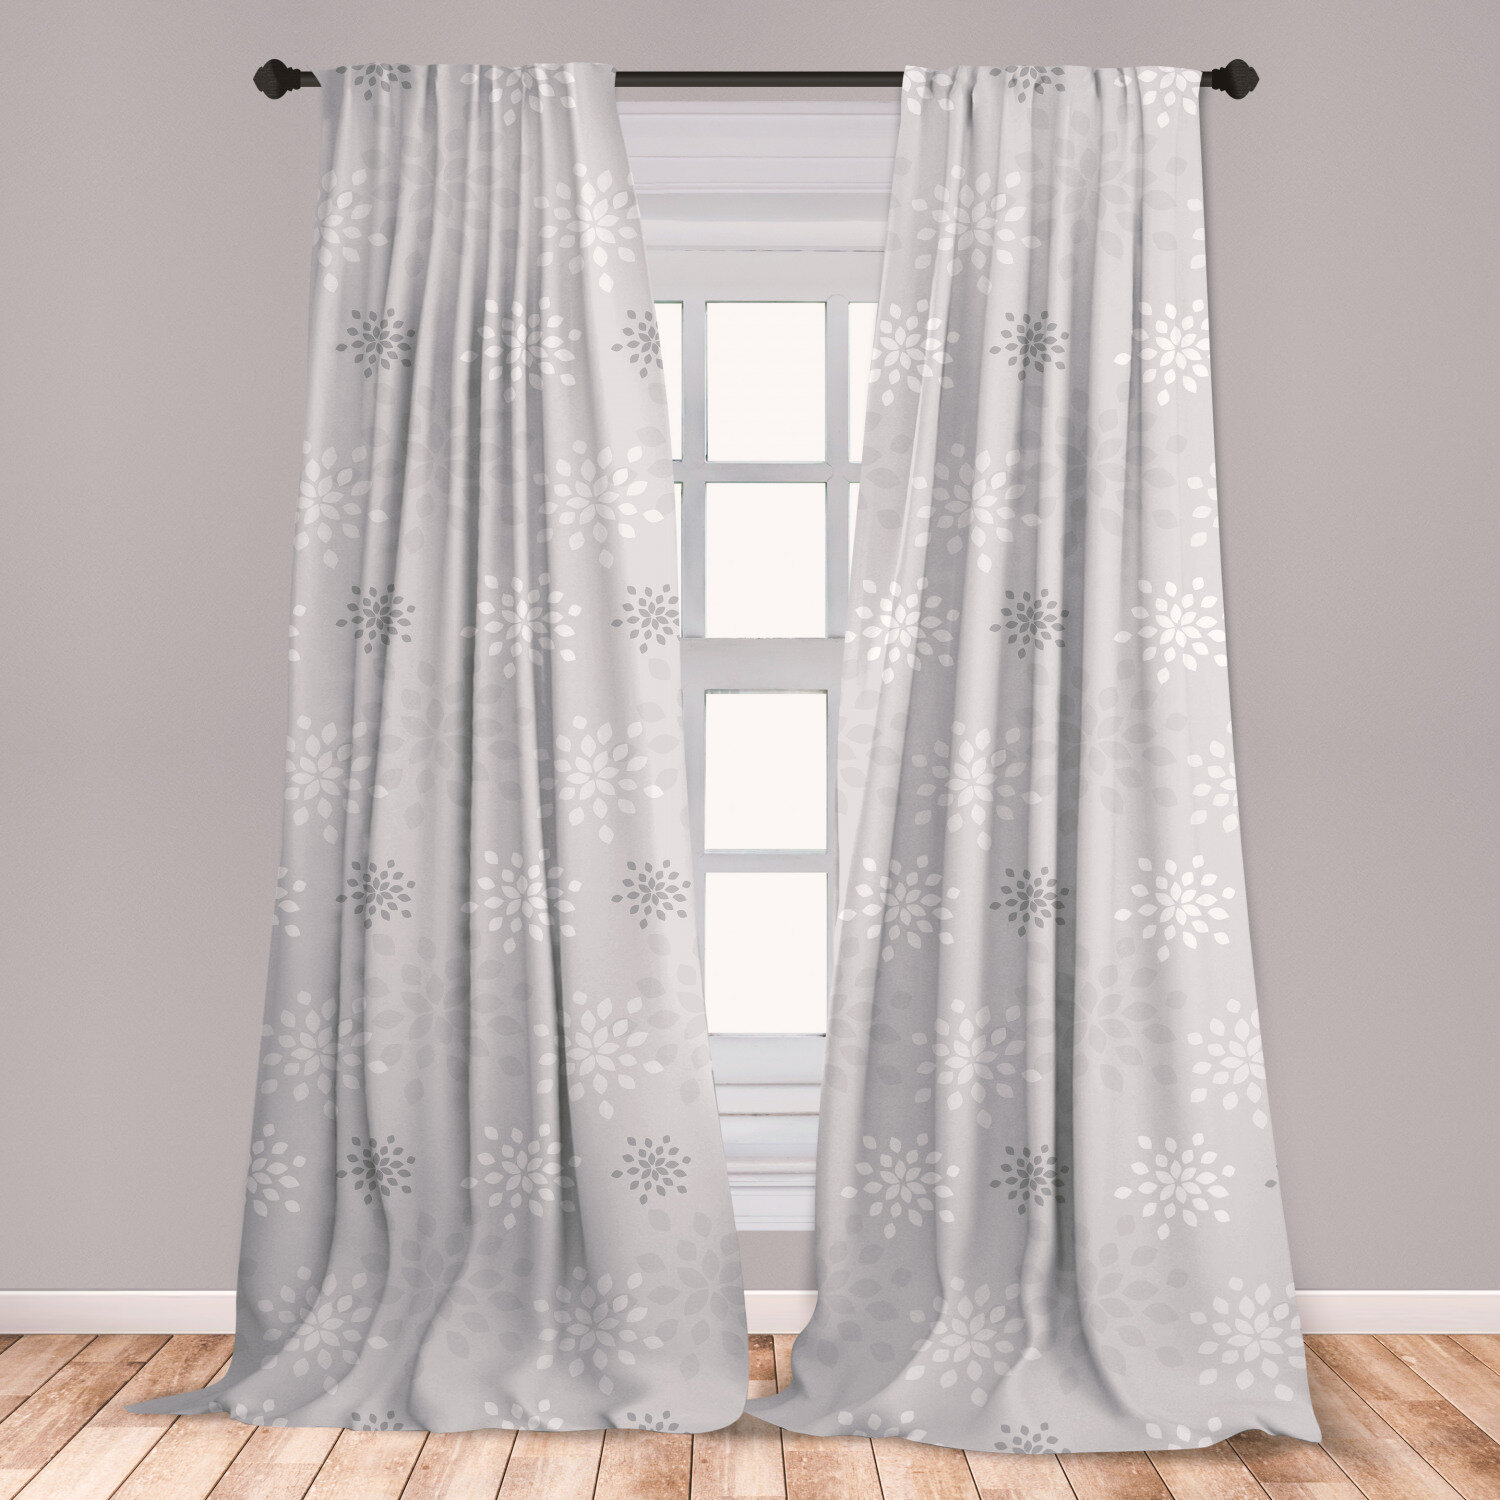 East Urban Home Ambesonne Grey And White Curtains Shabby Form Simplistic Flourishing Floral Nature Beauty Ornamental Romantic Window Treatments 2 Panel Set For Living Room Bedroom Decor 56 X 63 Grey White